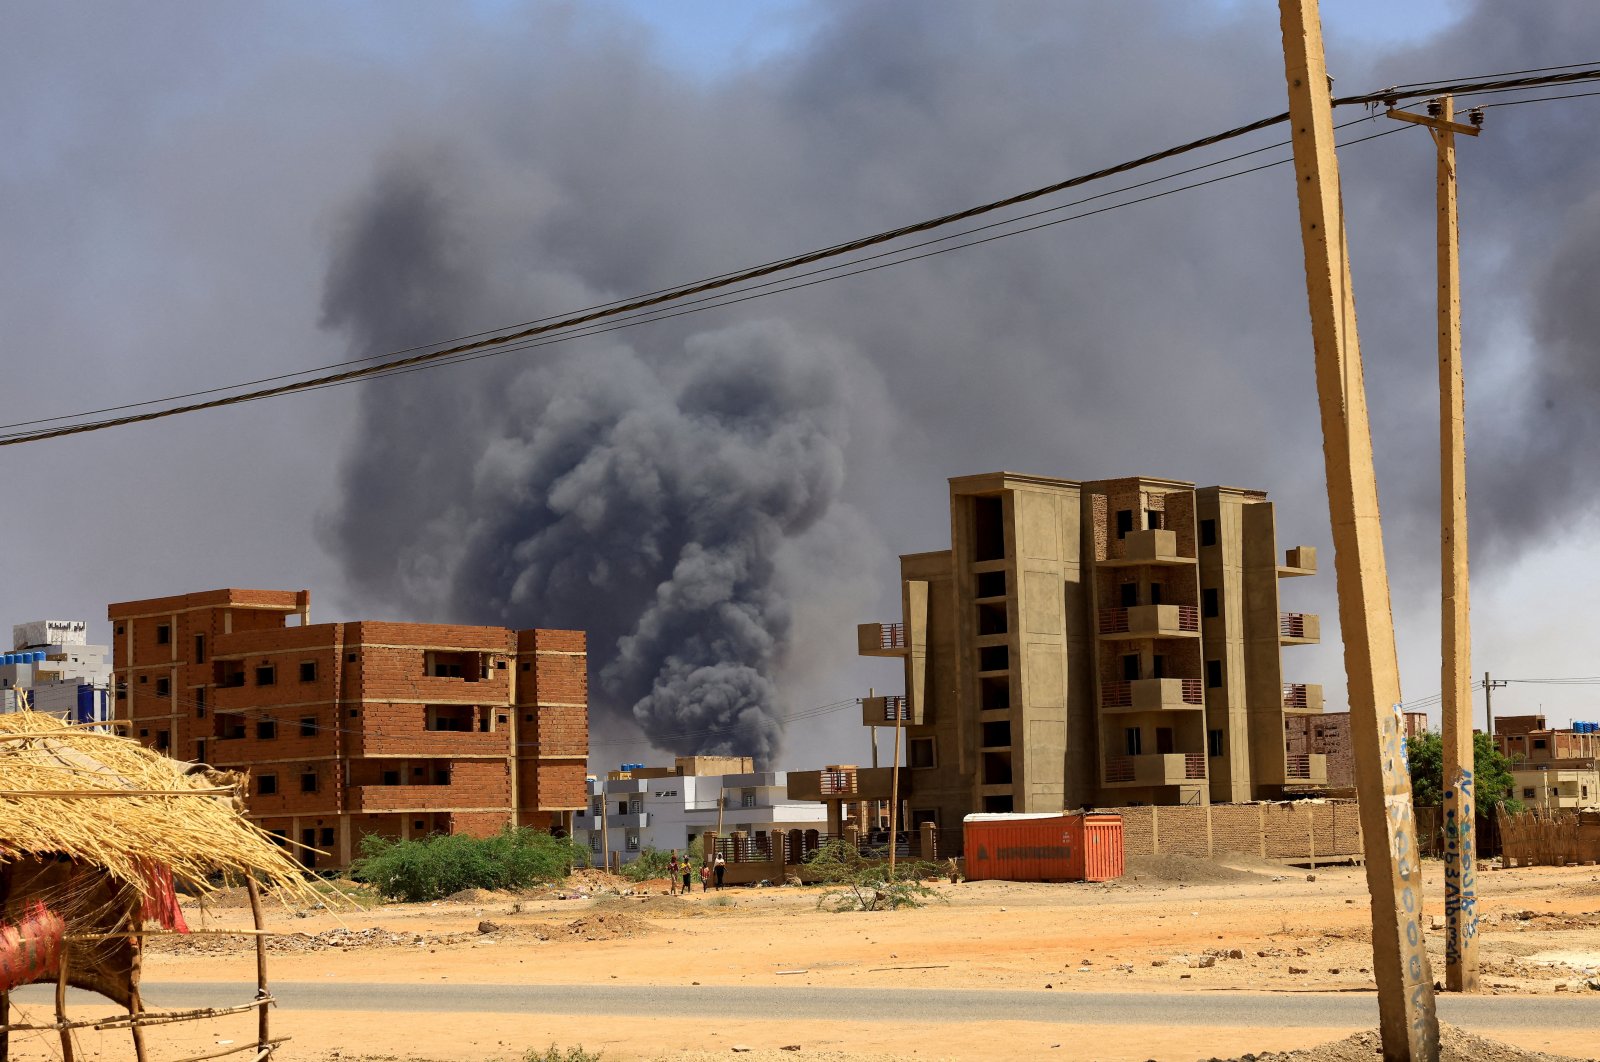 Smoke rises above buildings after an aerial bombardment during clashes between the paramilitary RSF and the army, in Khartoum North, Sudan, May 1, 2023. (Reuters Photo)